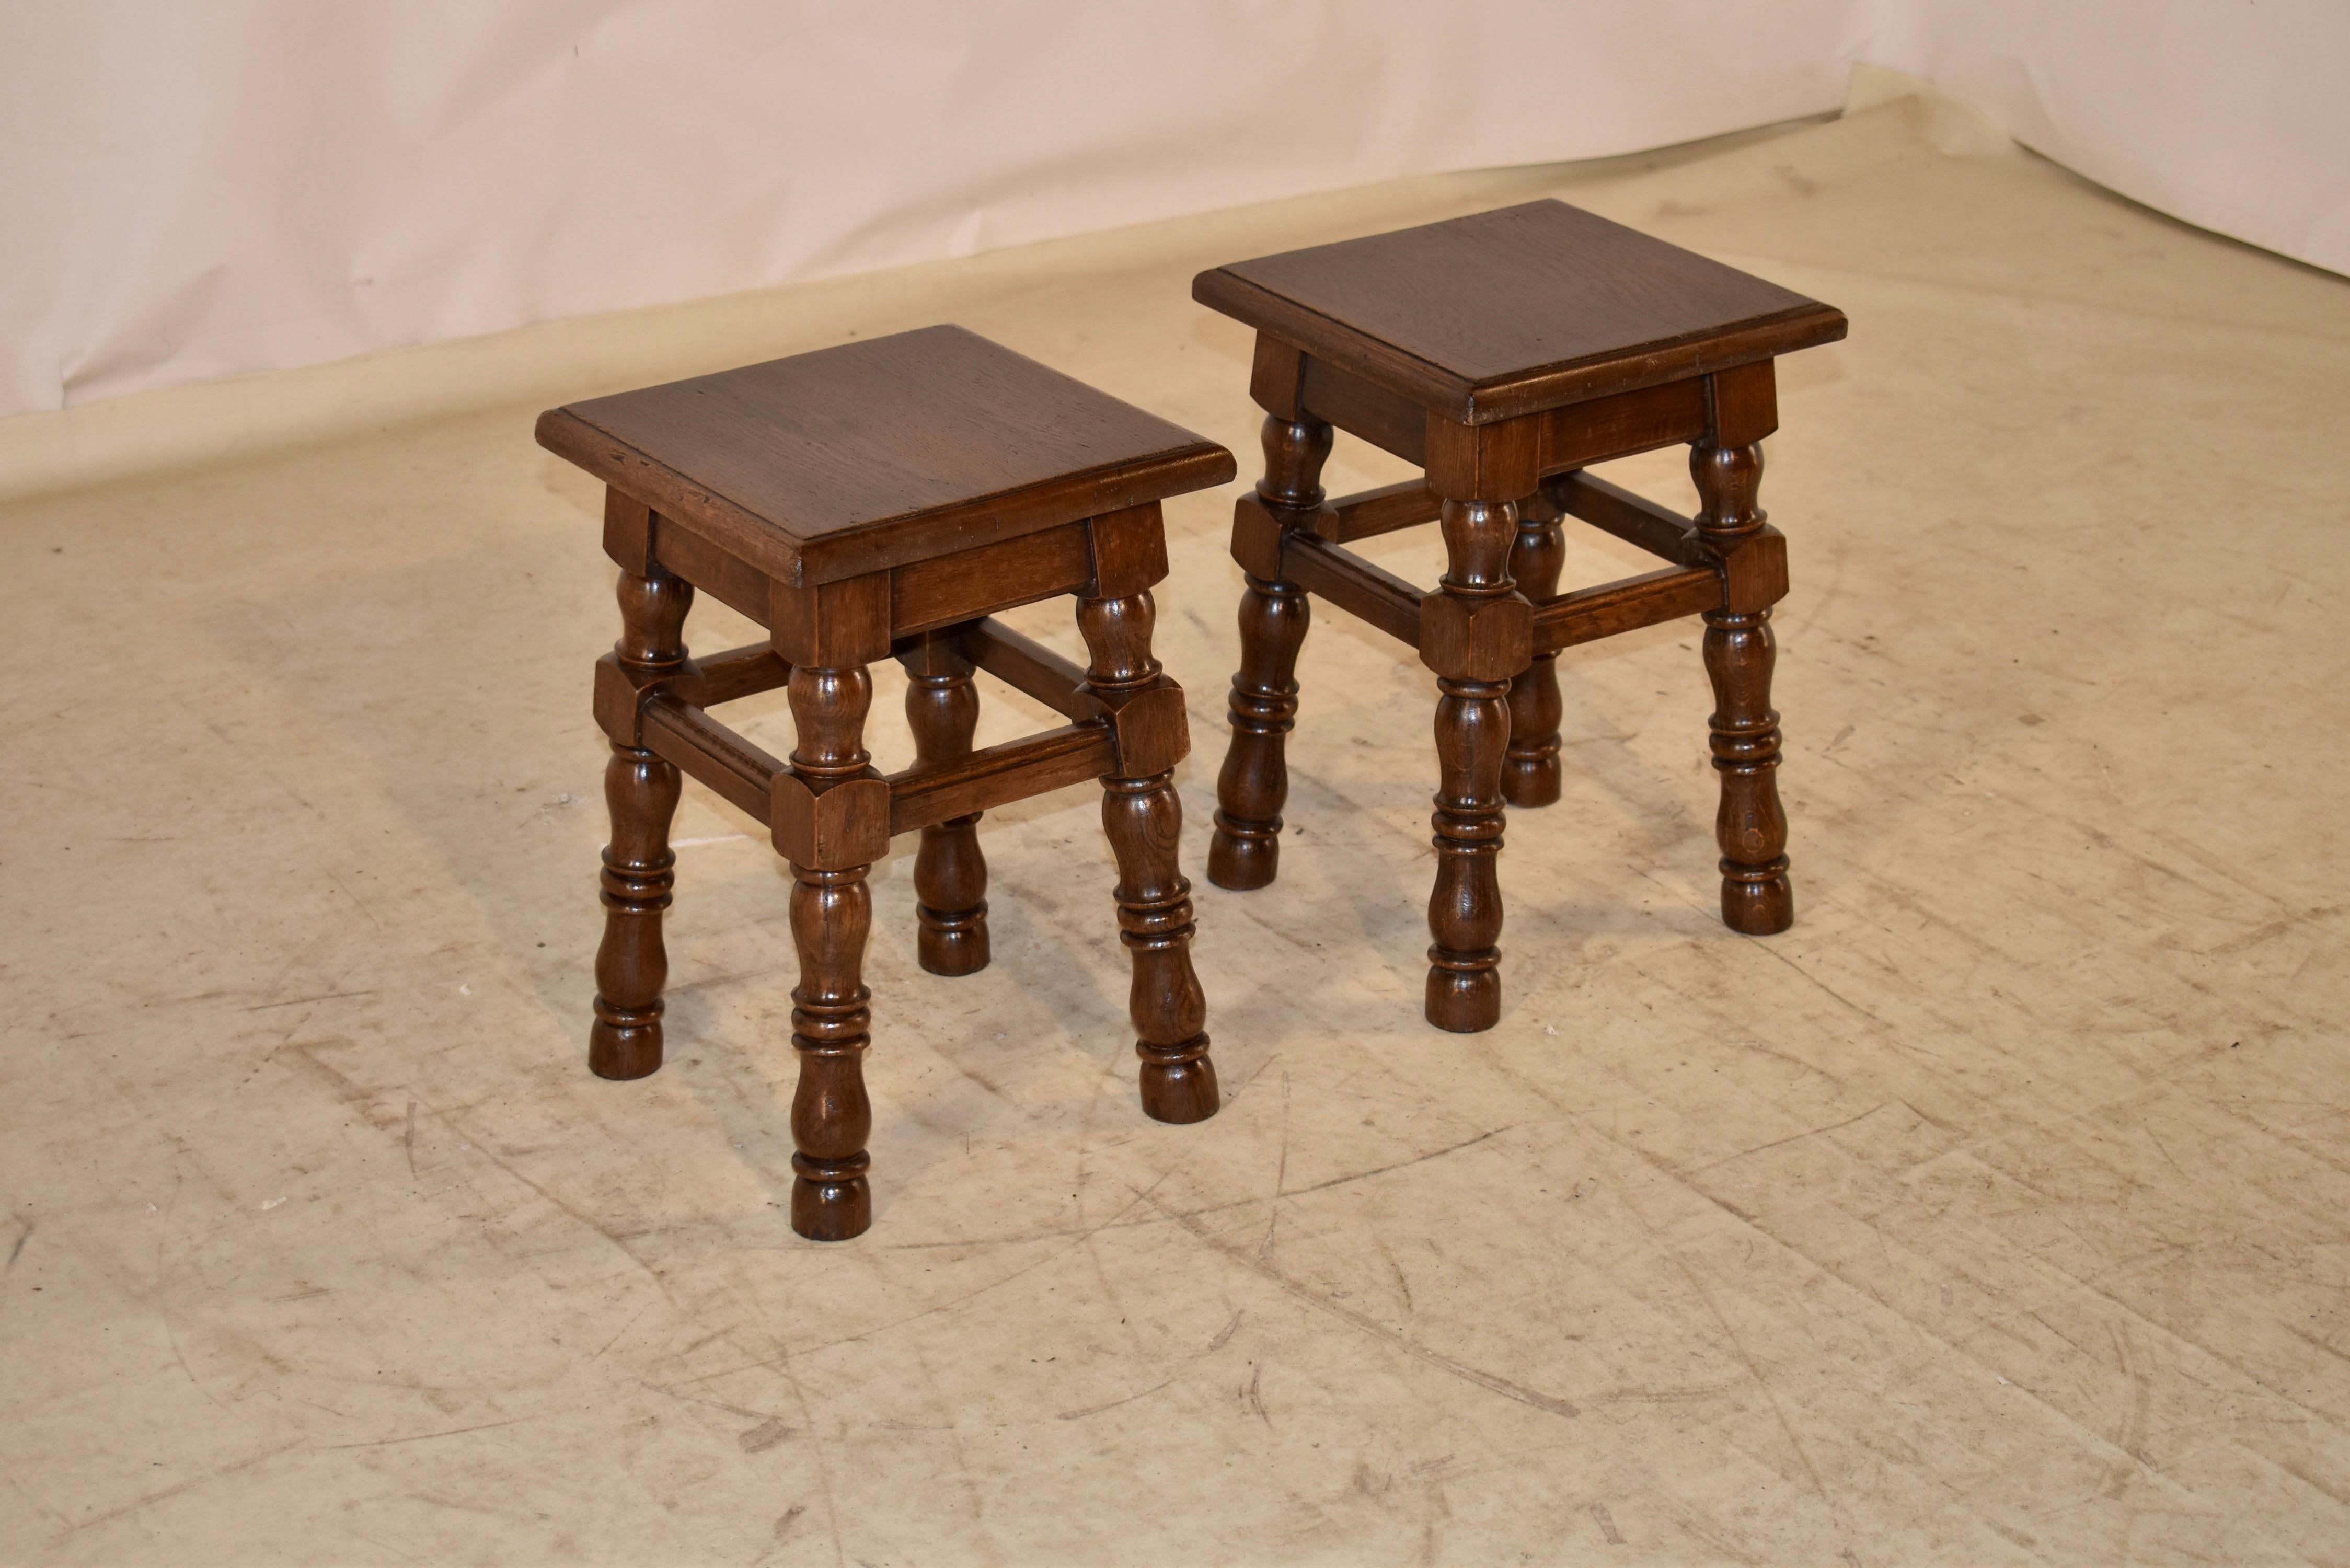 Pair of turned oak stools from France, circa 1900.  The seats have beveled edges and follows down to simple aprons and hand turned splayed legs, joined by simple stretchers with molded edges.  